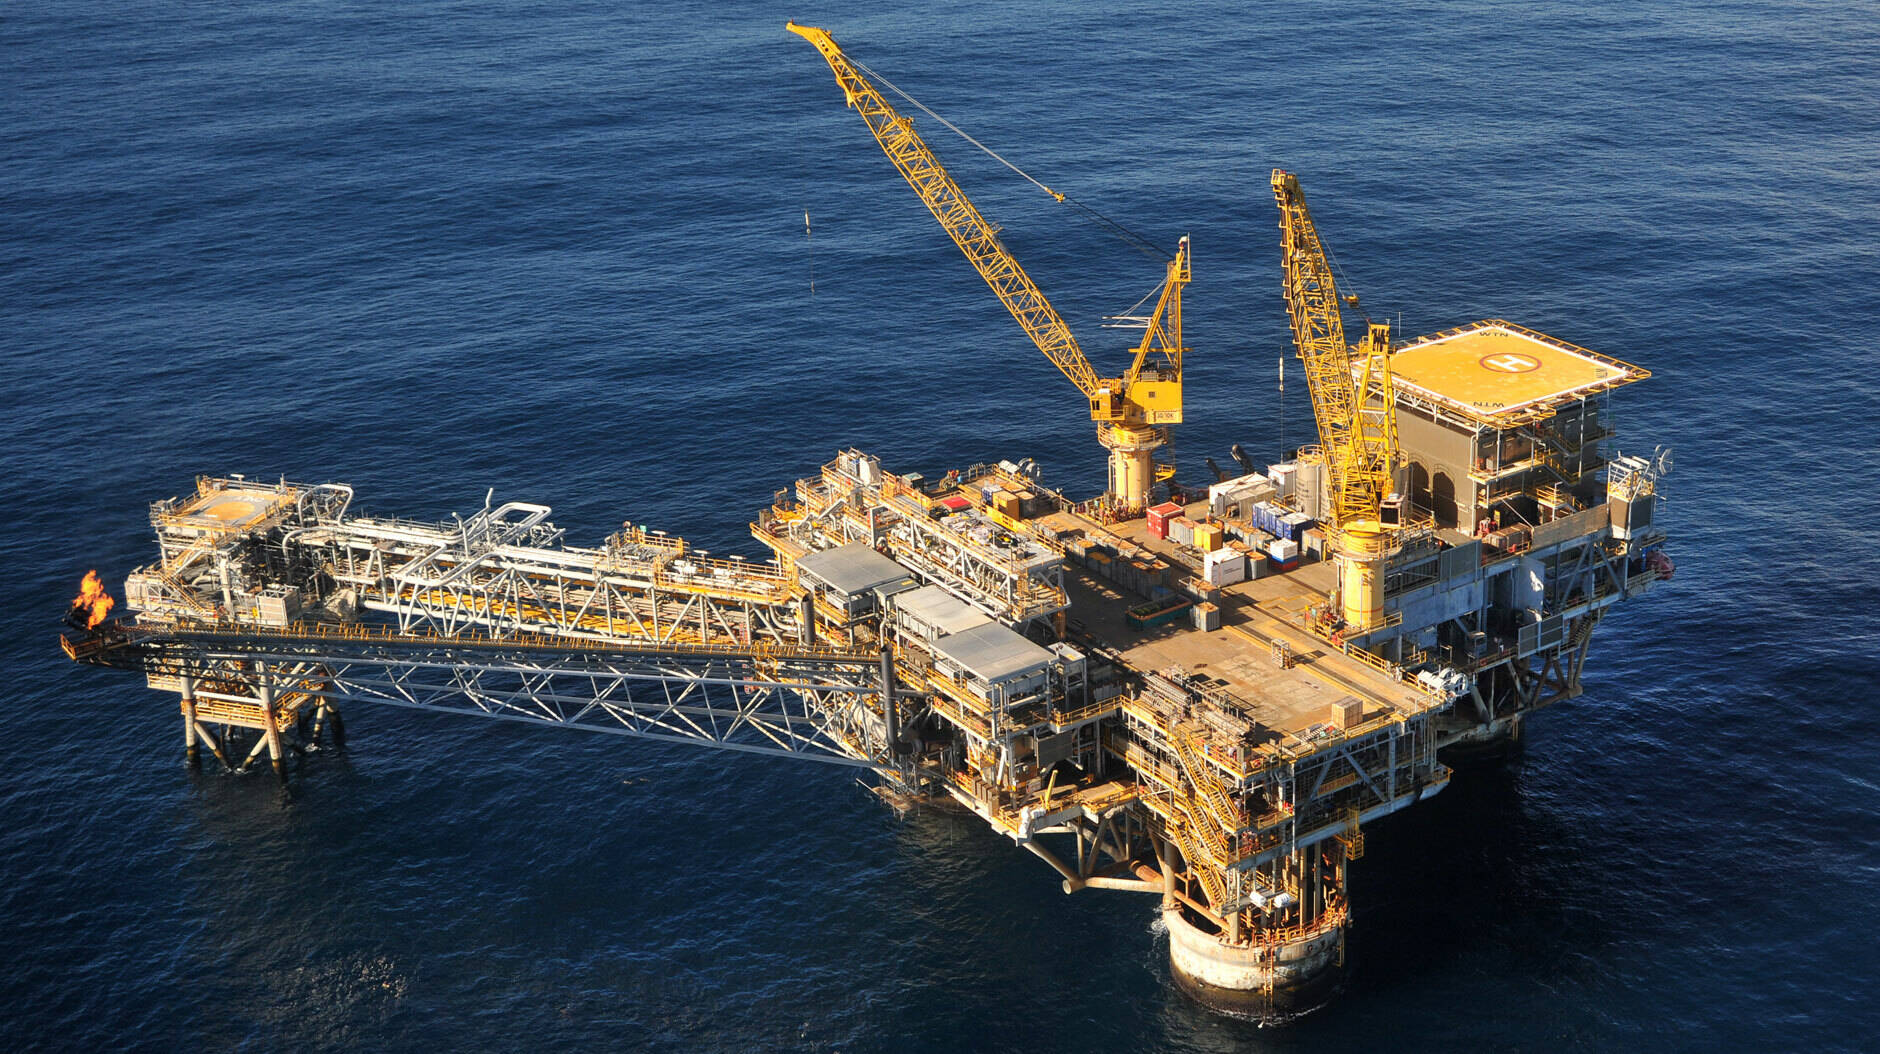 Image Photo — West Tuna Platform. “Today the gas market demand has the potential to take as much gas as our Gippsland operations can produce.”